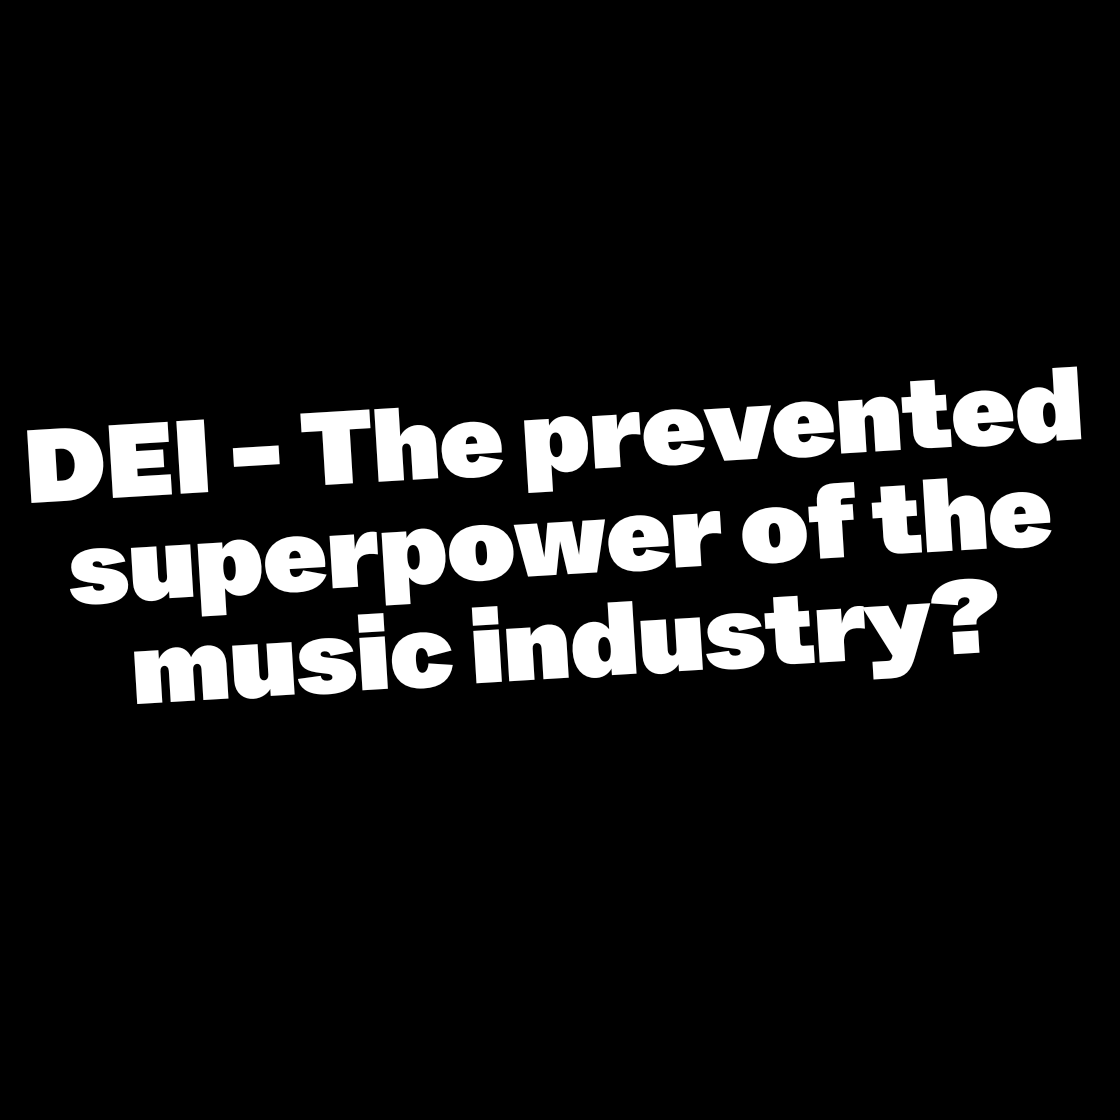 DEI - The prevented superpower of the music industry?